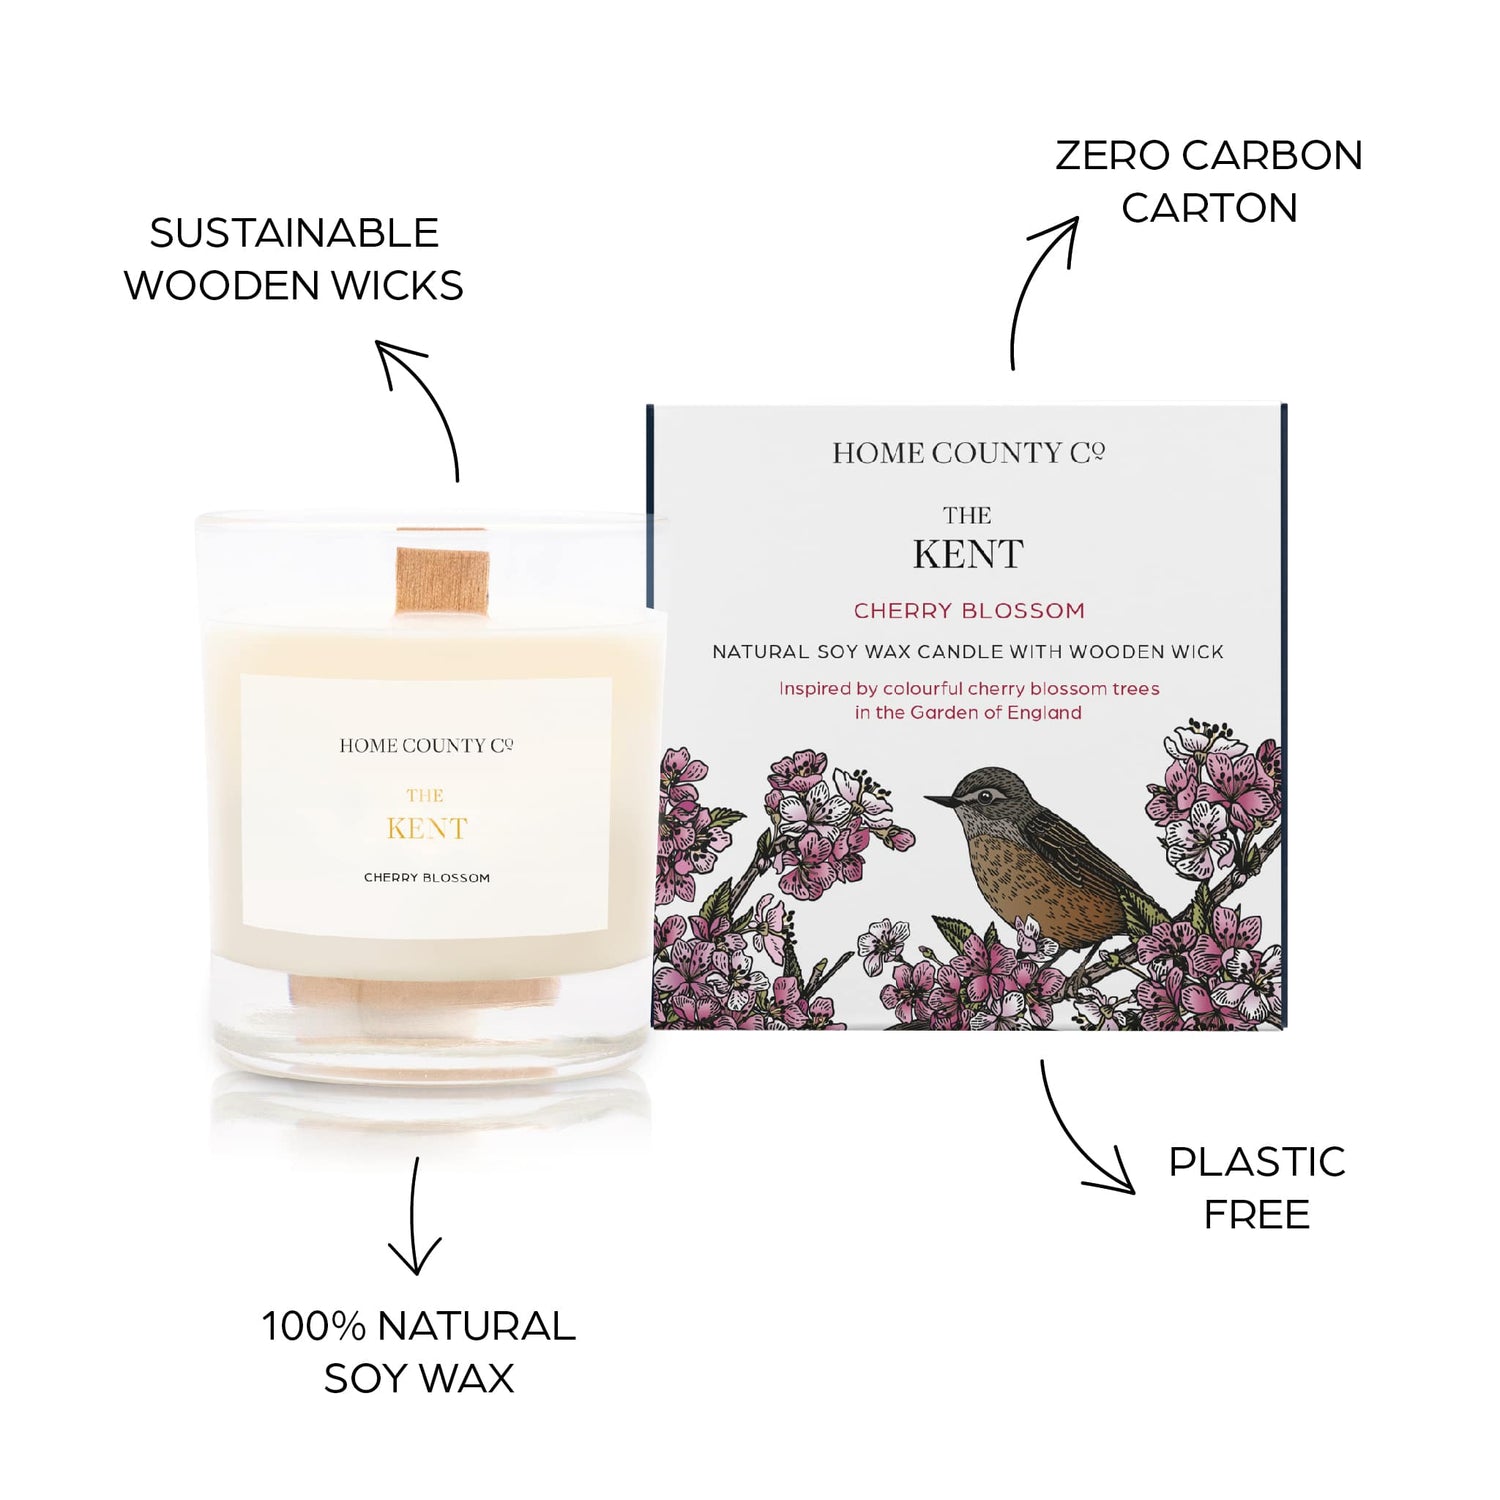 Sustainable candle credentials are shown around the cherry blossom scented candle image - sustainable wooden wicks, zero carbon carton, 100% natural soy wax, plastic free